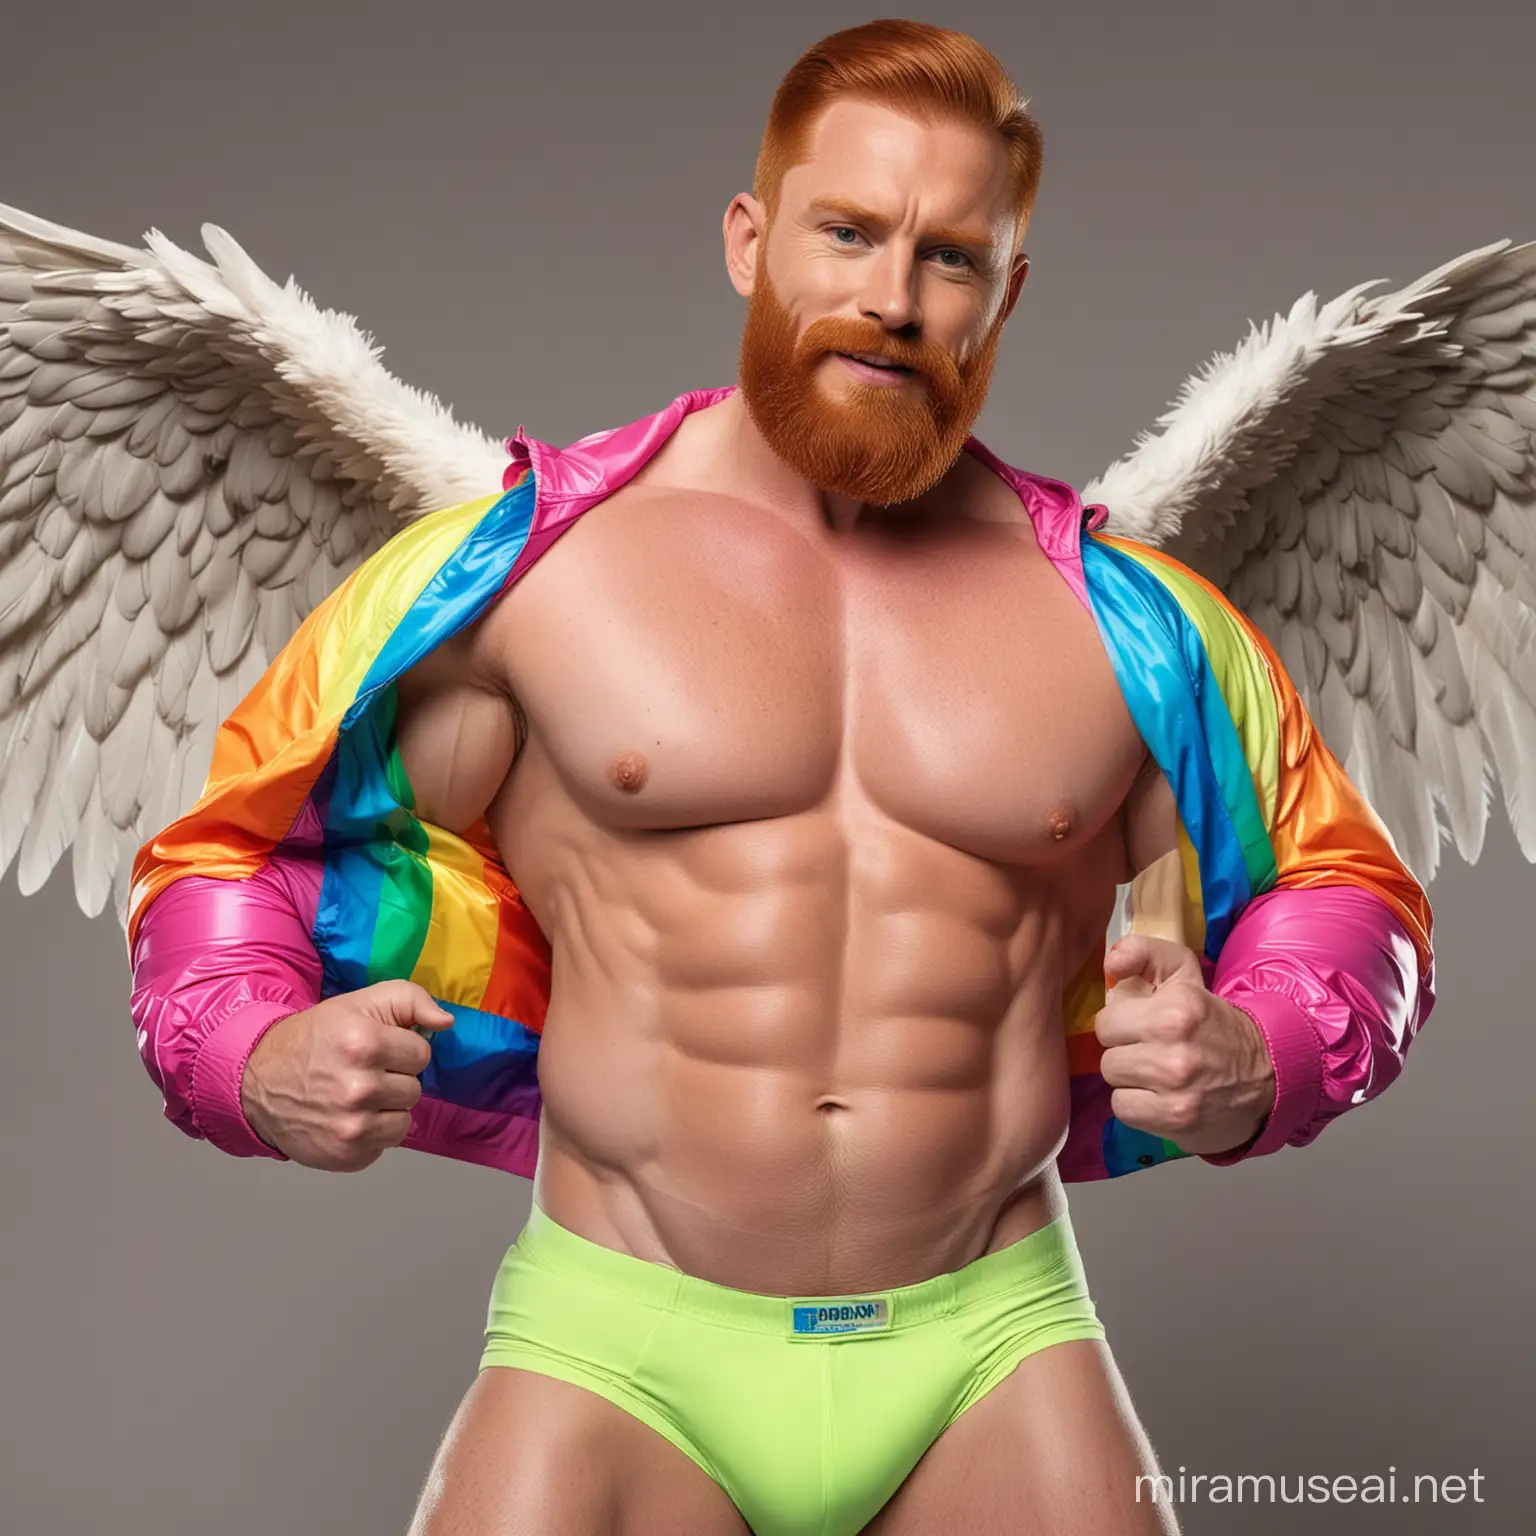 Muscular Redhead Bodybuilder Flexing with Colorful Jacket and Eagle Wings